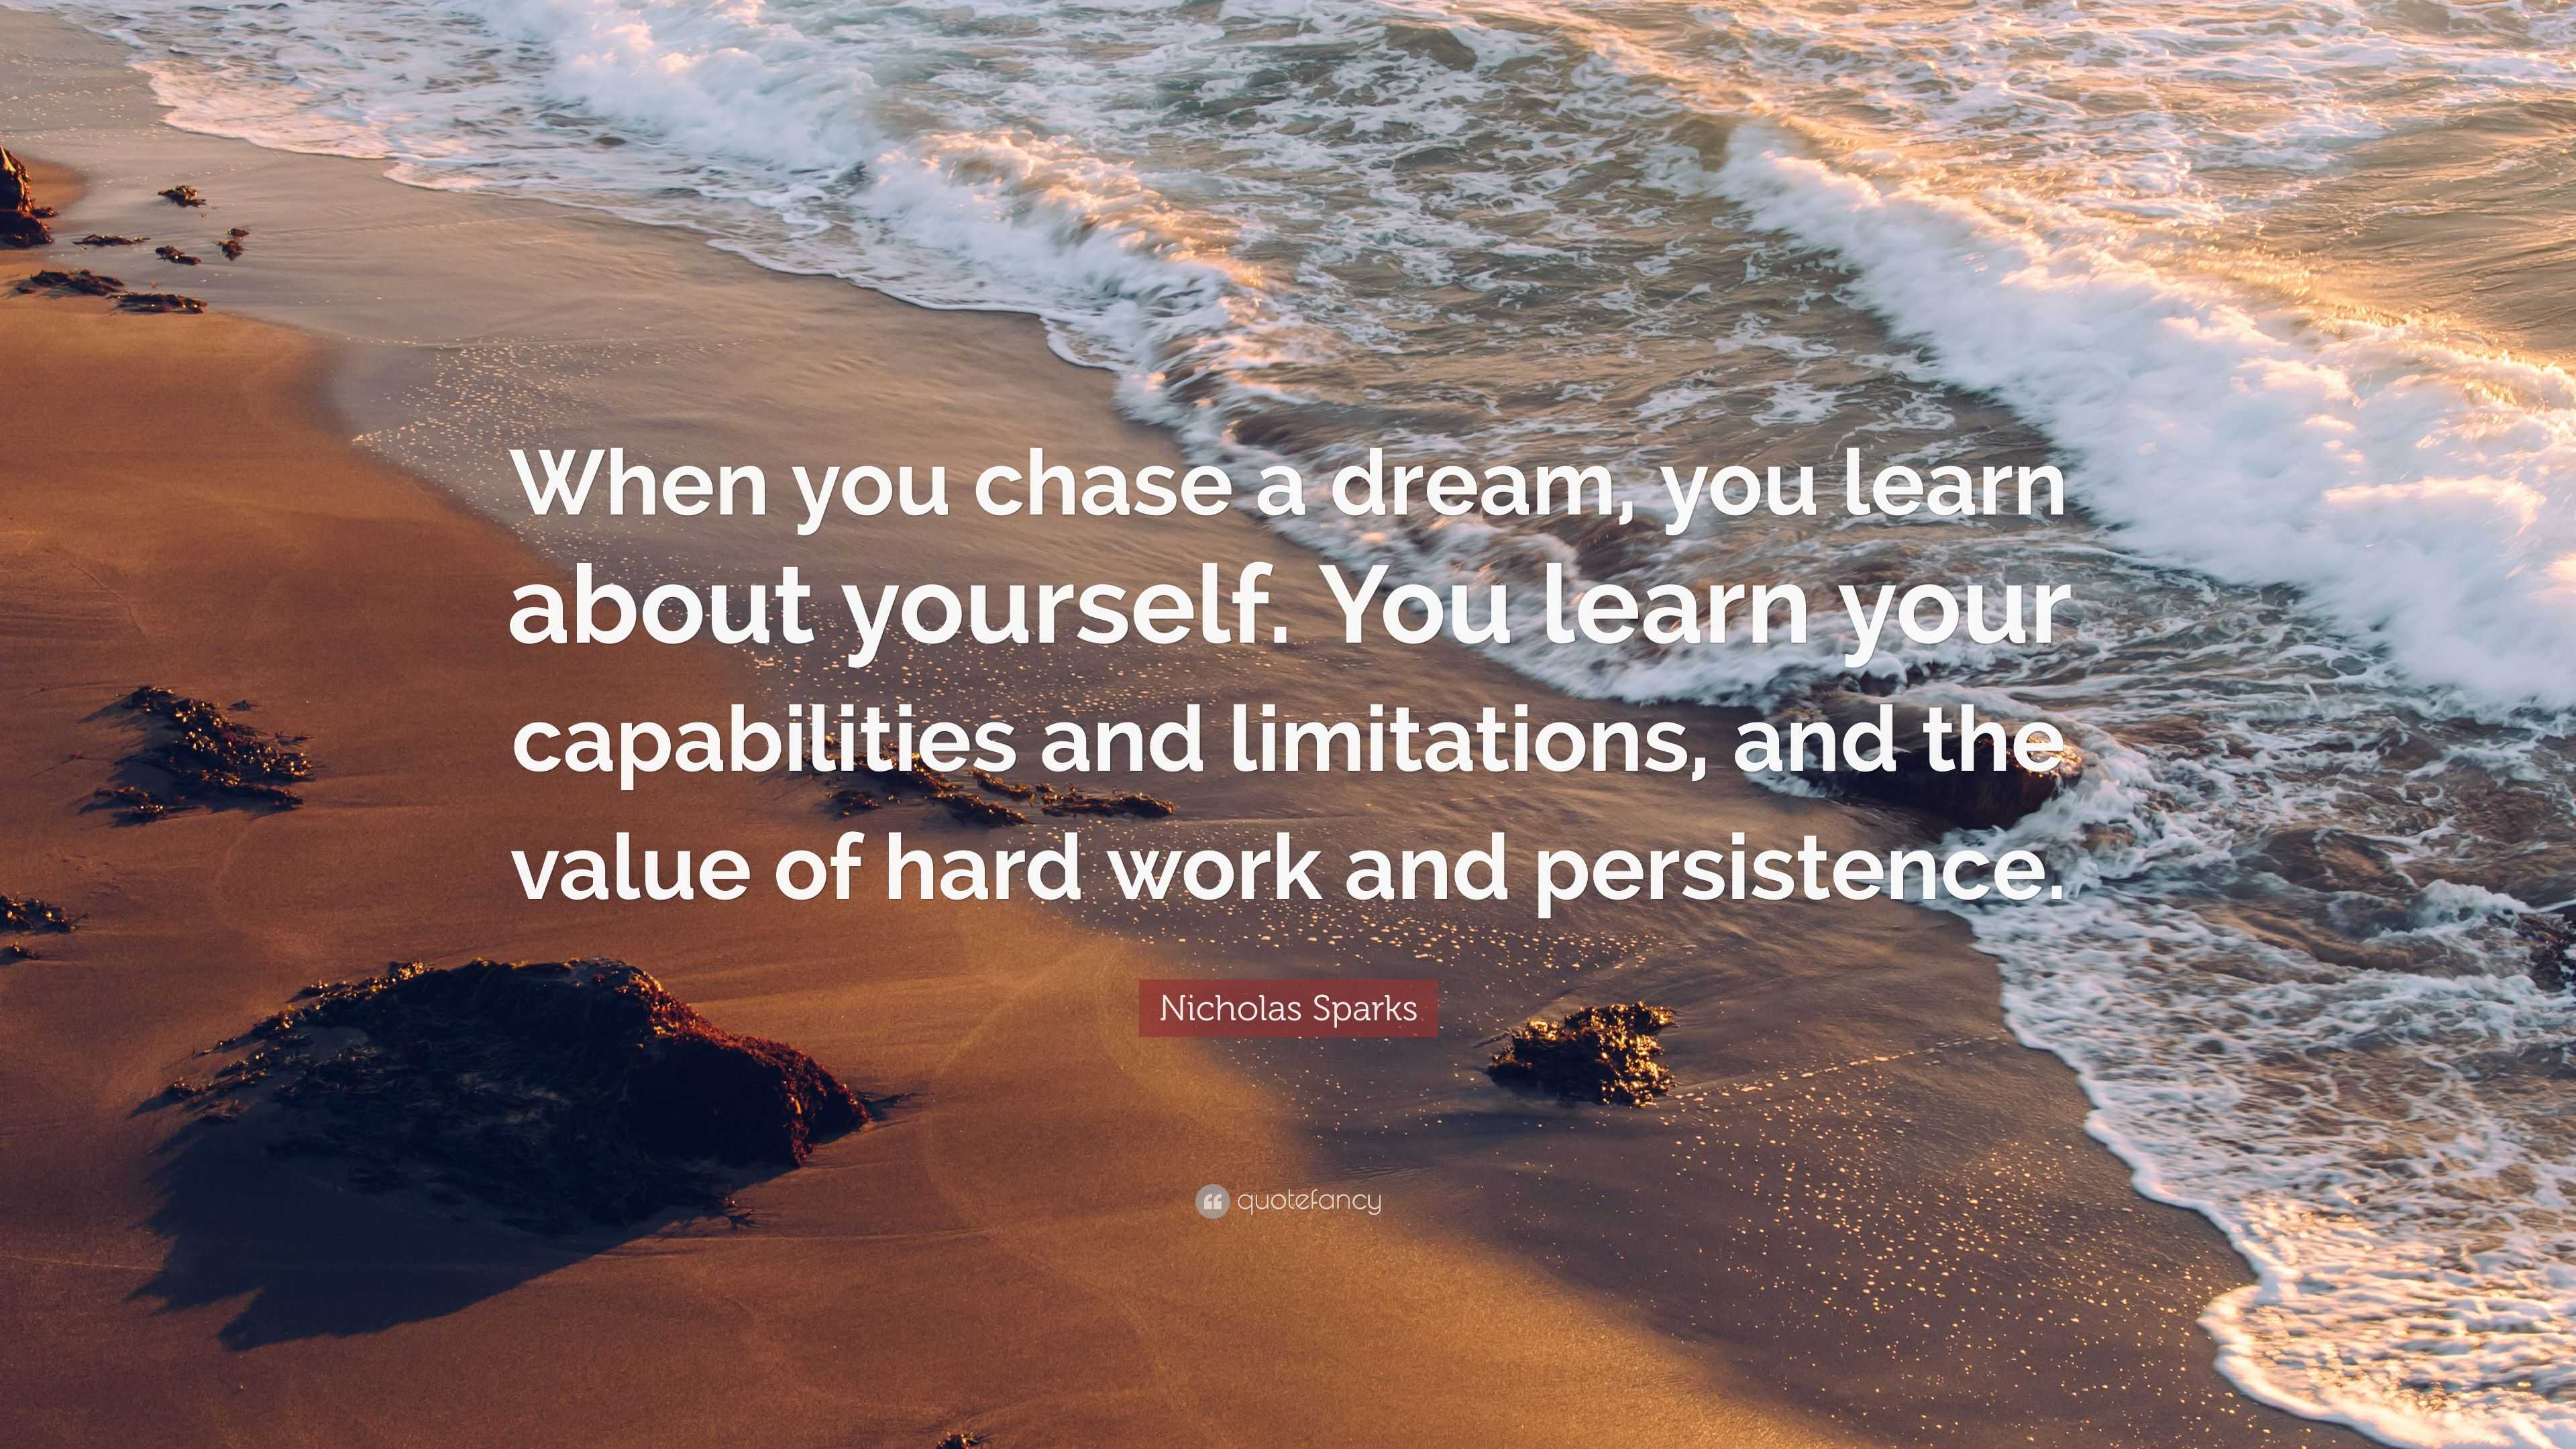 Nicholas Sparks Quote: “When you chase a dream, you learn about ...